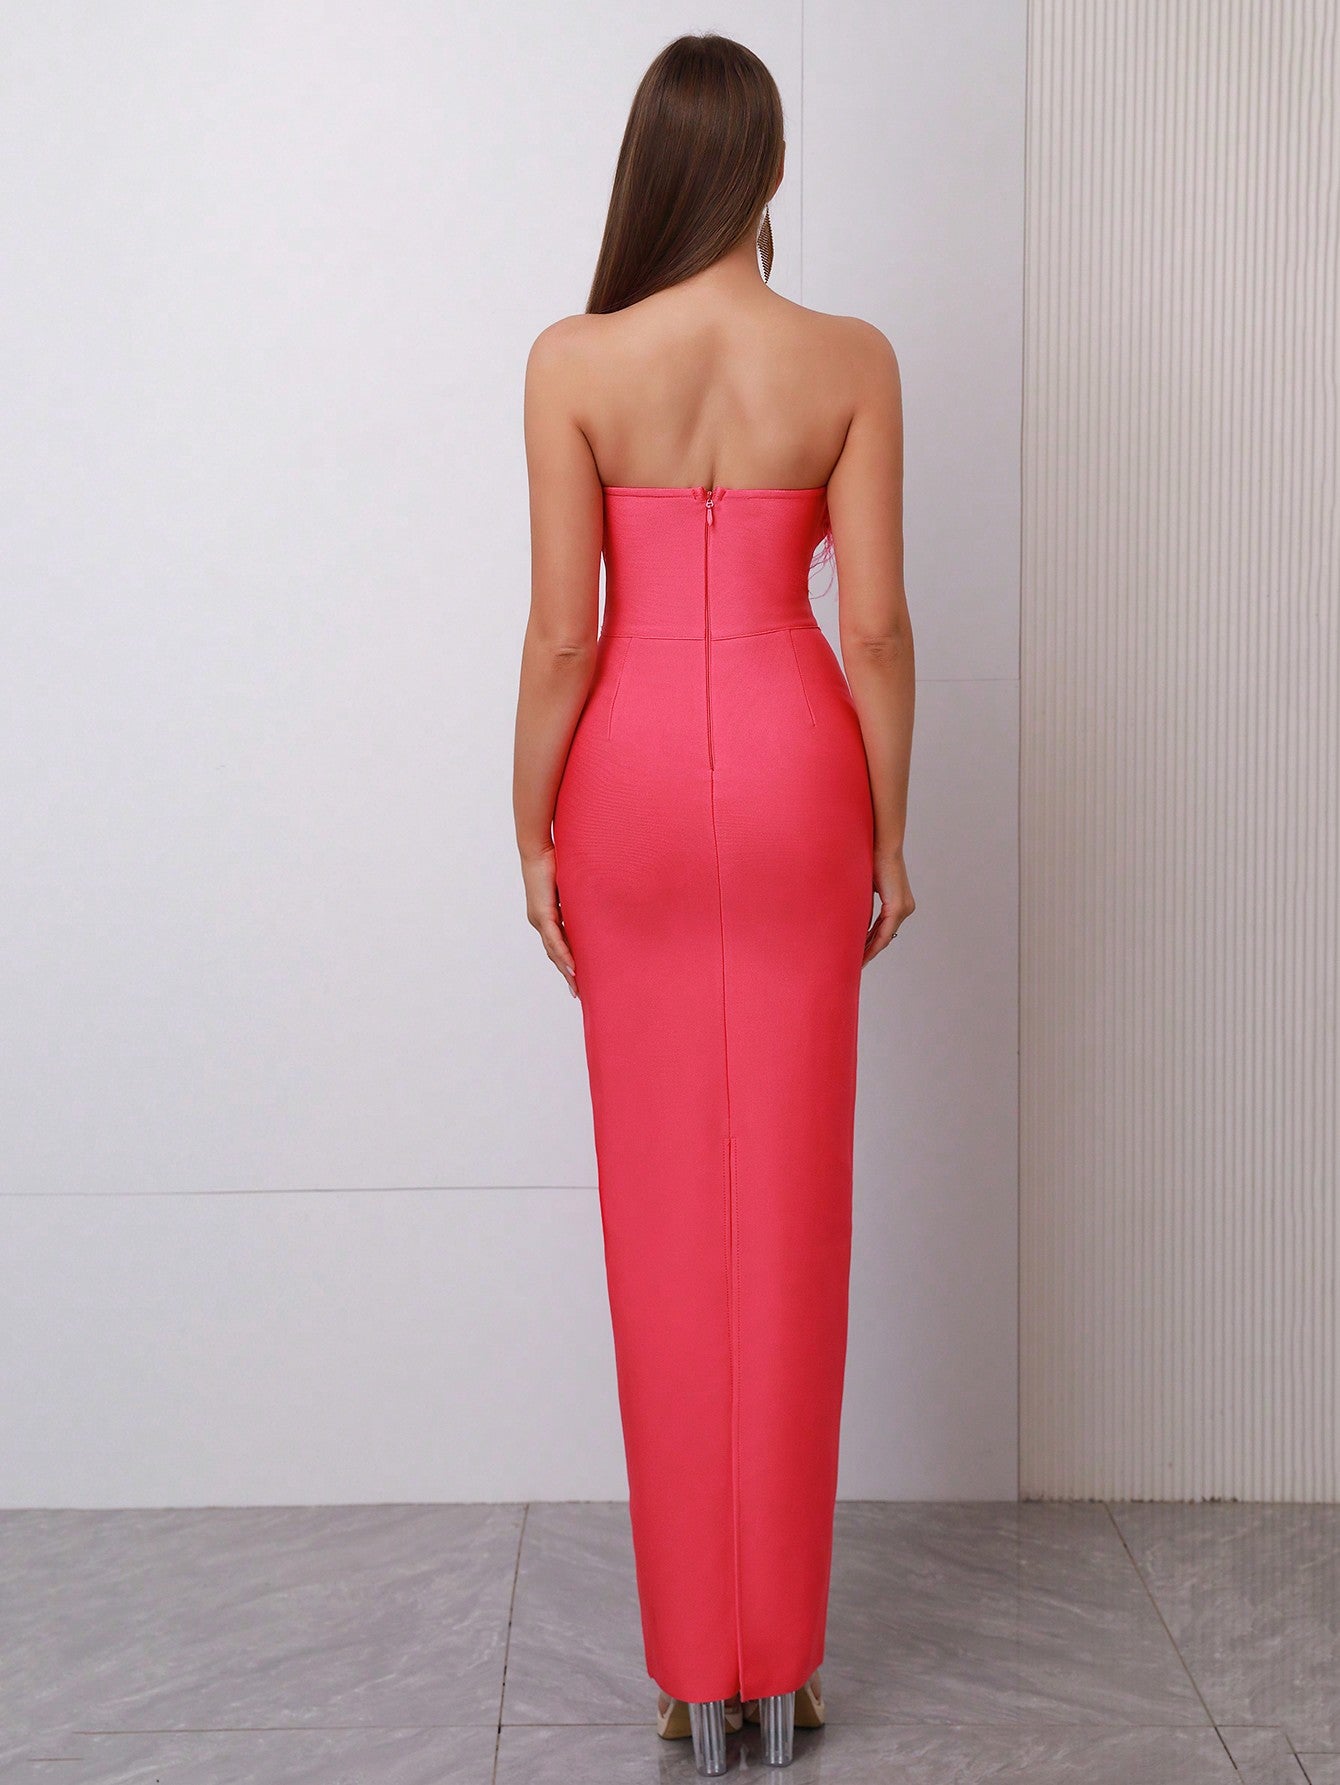 LLstyle Off-shoulder Backless Party Dress